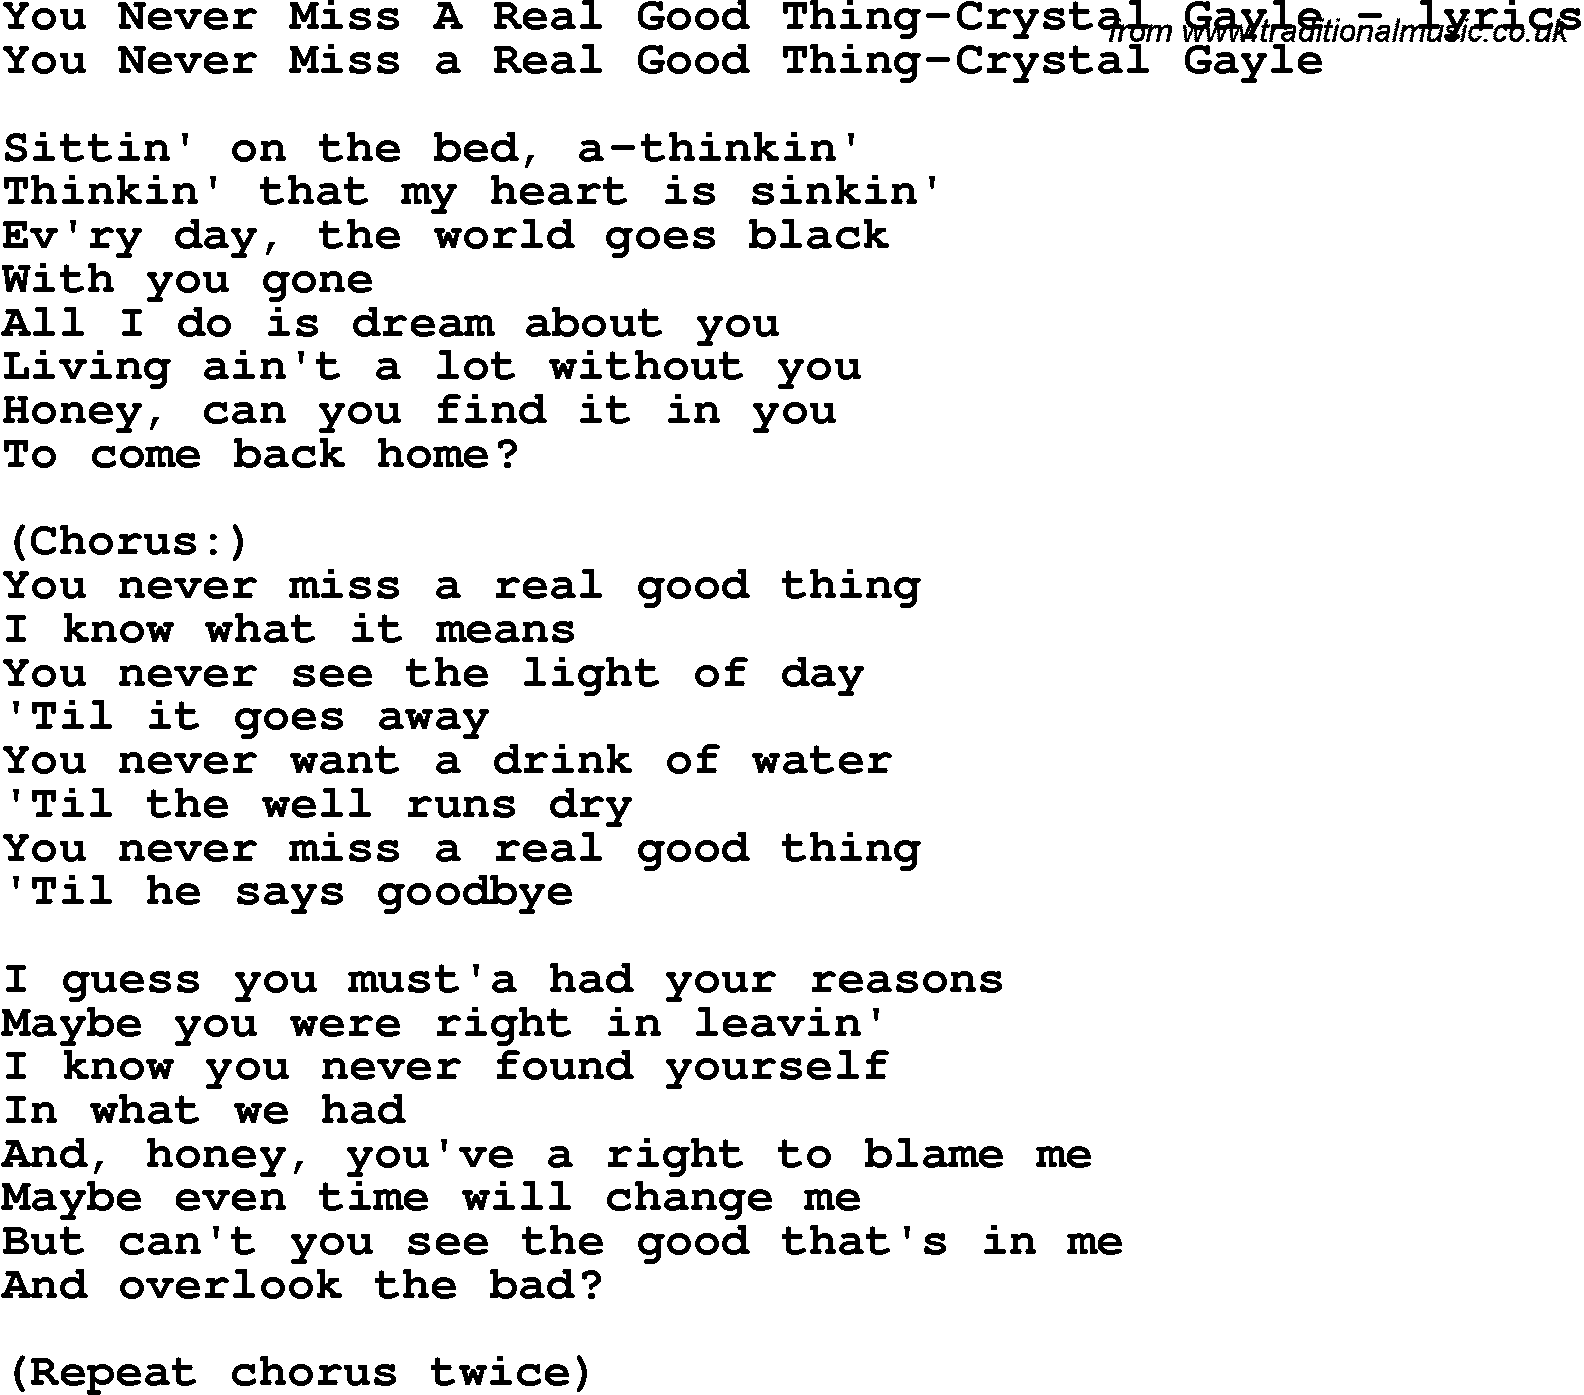 Love Song Lyrics for: You Never Miss A Real Good Thing-Crystal Gayle